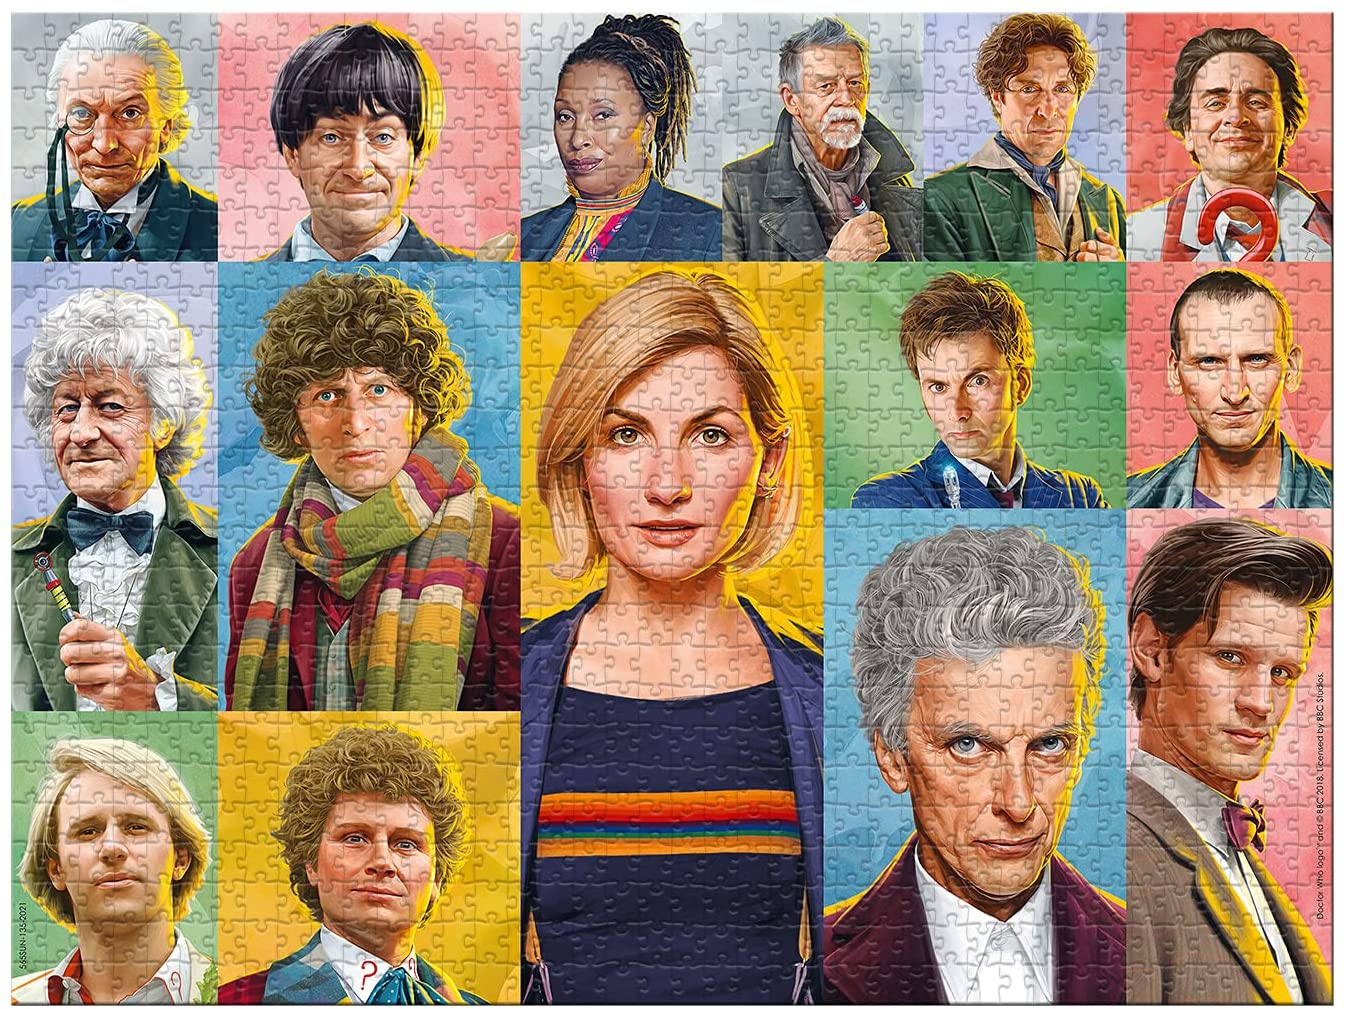 Doctor Who - The Doctors - 1000 Piece Jigsaw Puzzle